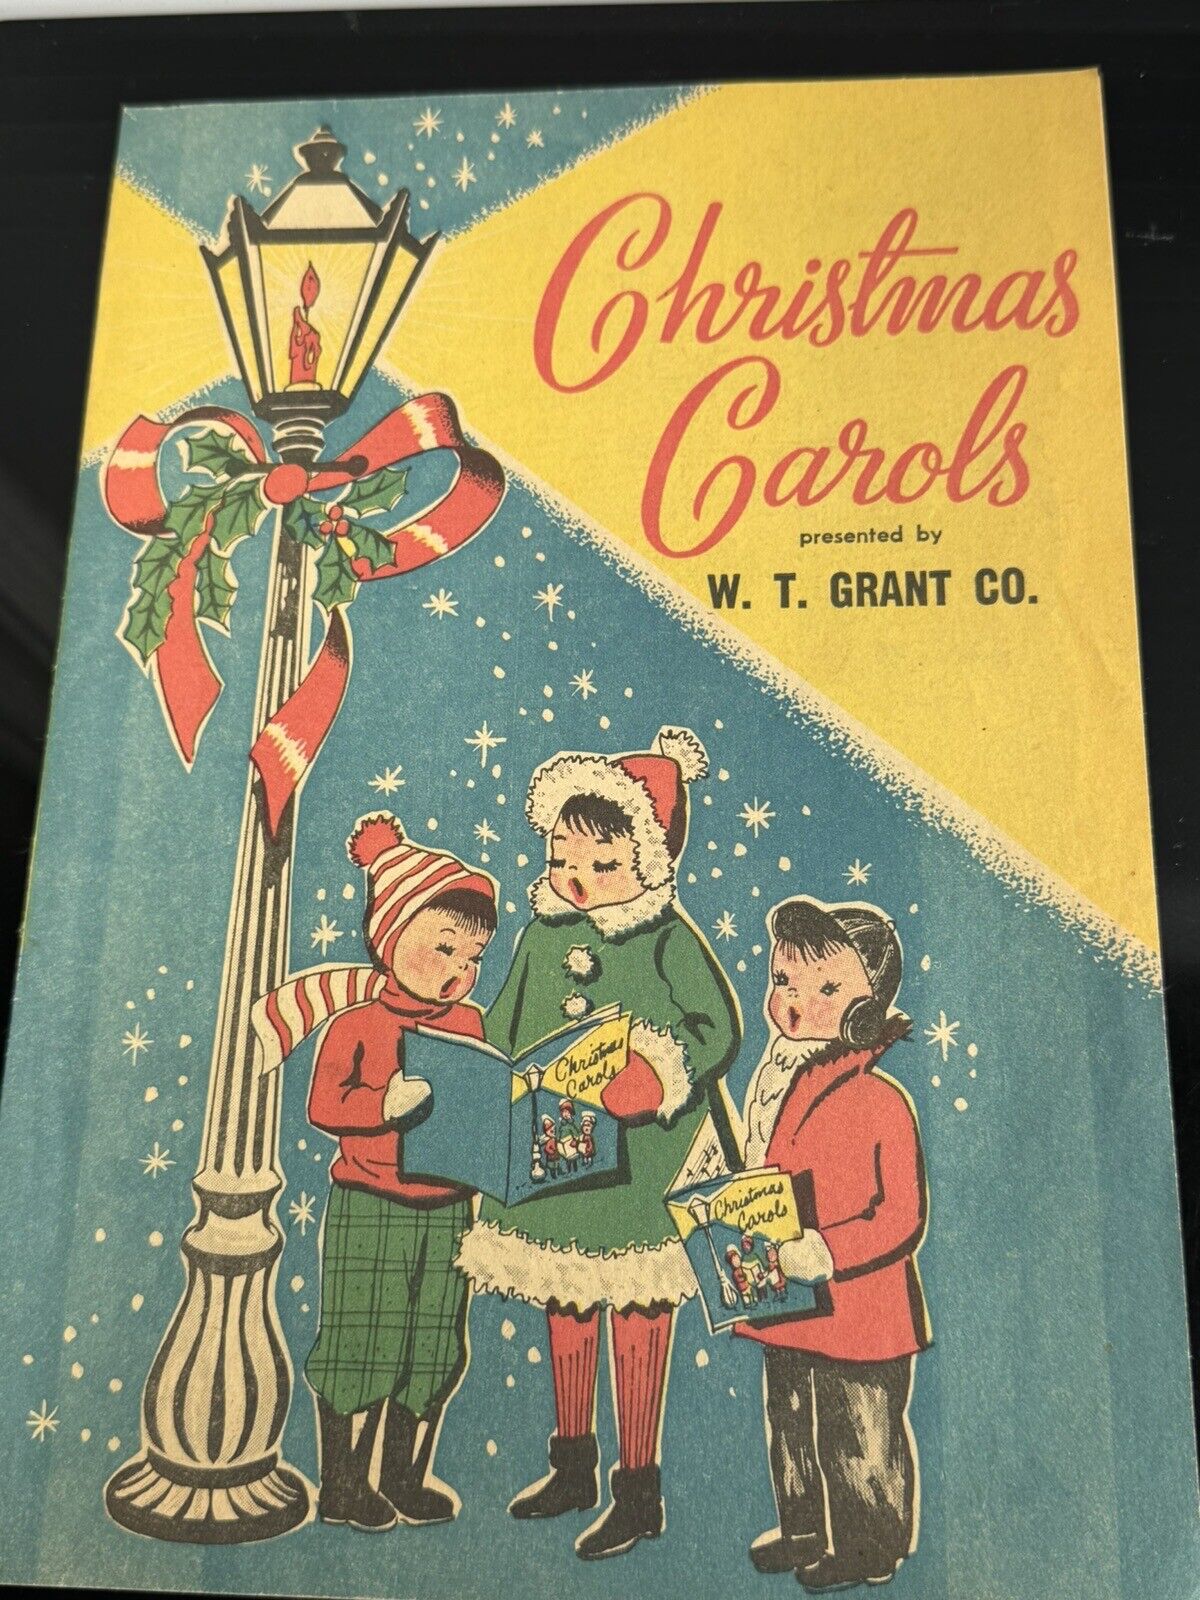 W. T. Grant Co. Grants Department Store Christmas Carols Comic Song Book